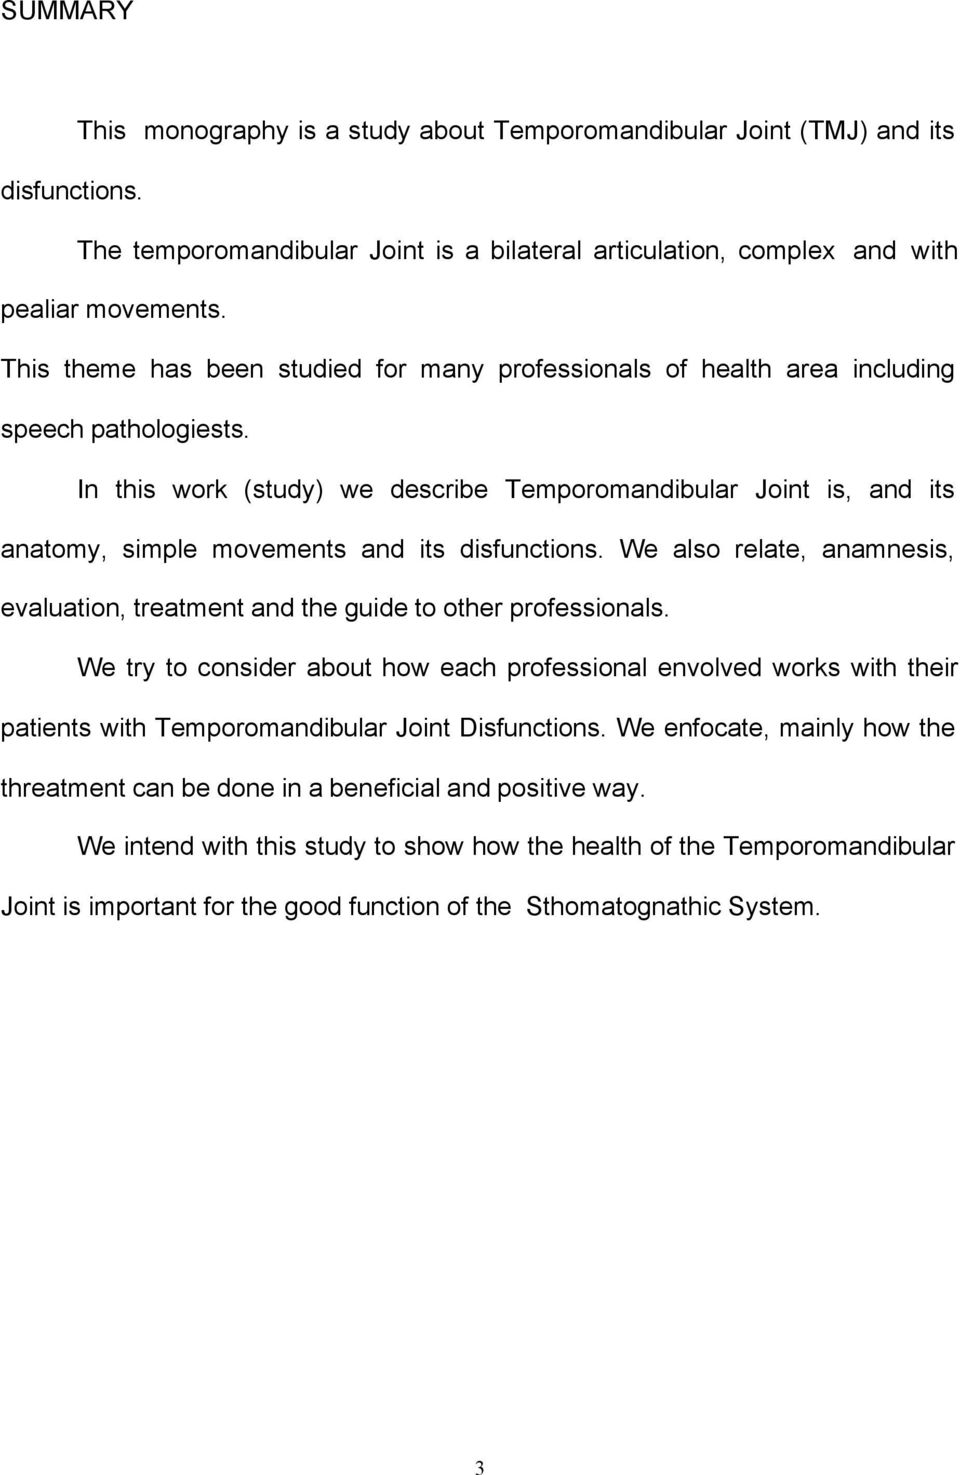 In this work (study) we describe Temporomandibular Joint is, and its anatomy, simple movements and its disfunctions.